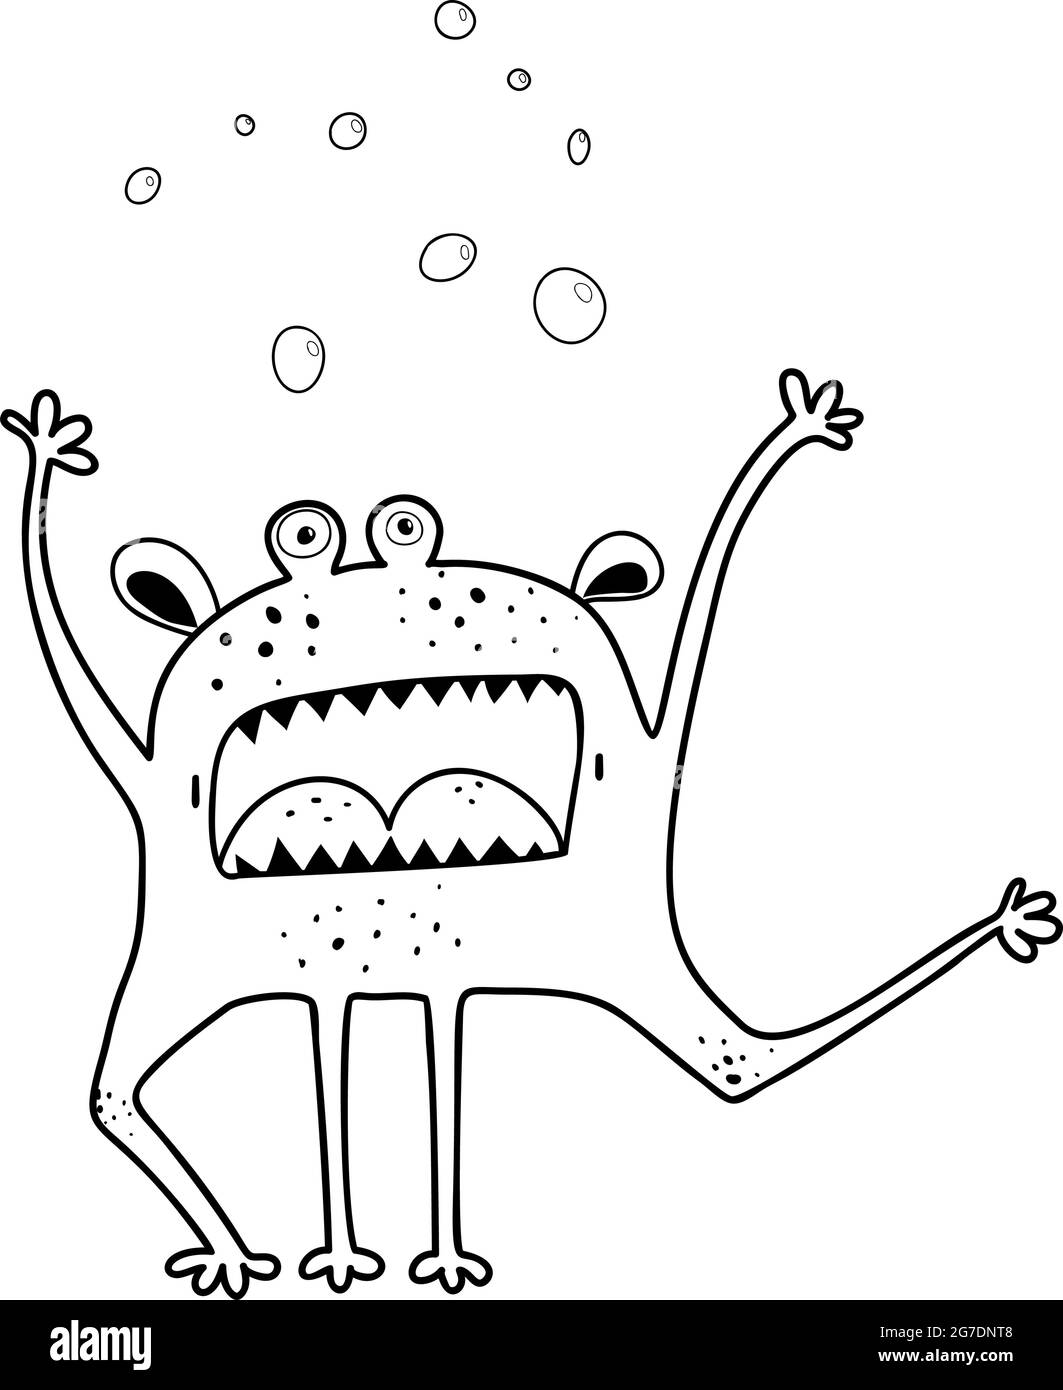 Screaming Angry Monster Character Coloring Page Stock Vektor